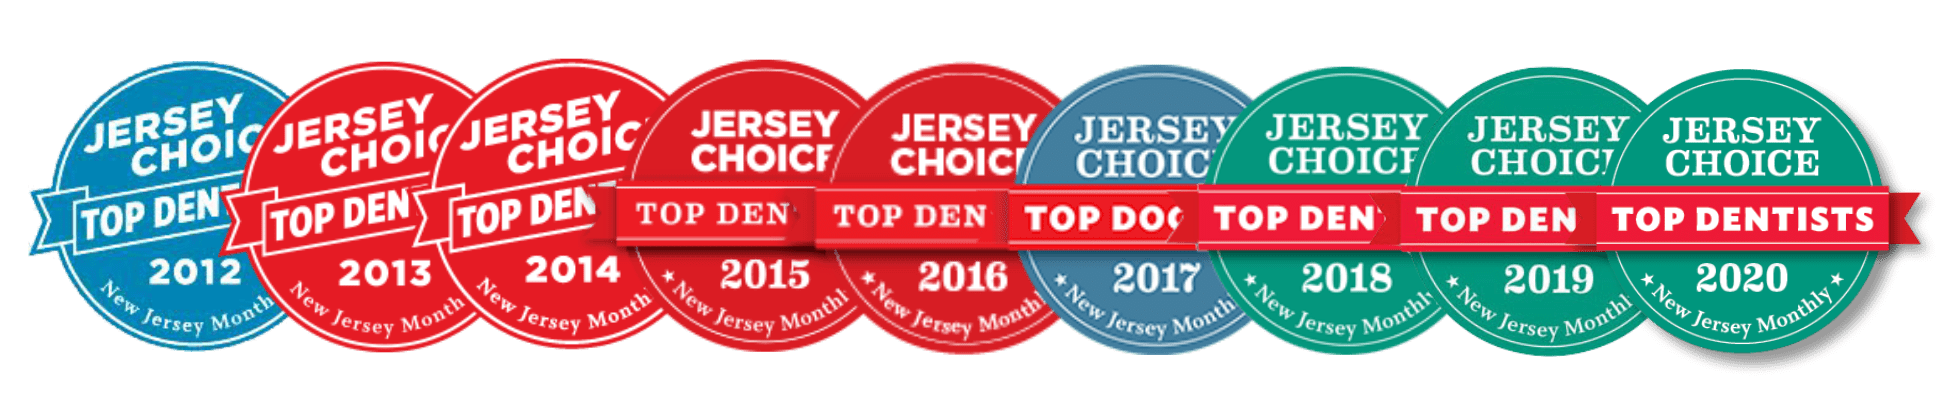 New Jersey Choice Top Dentists